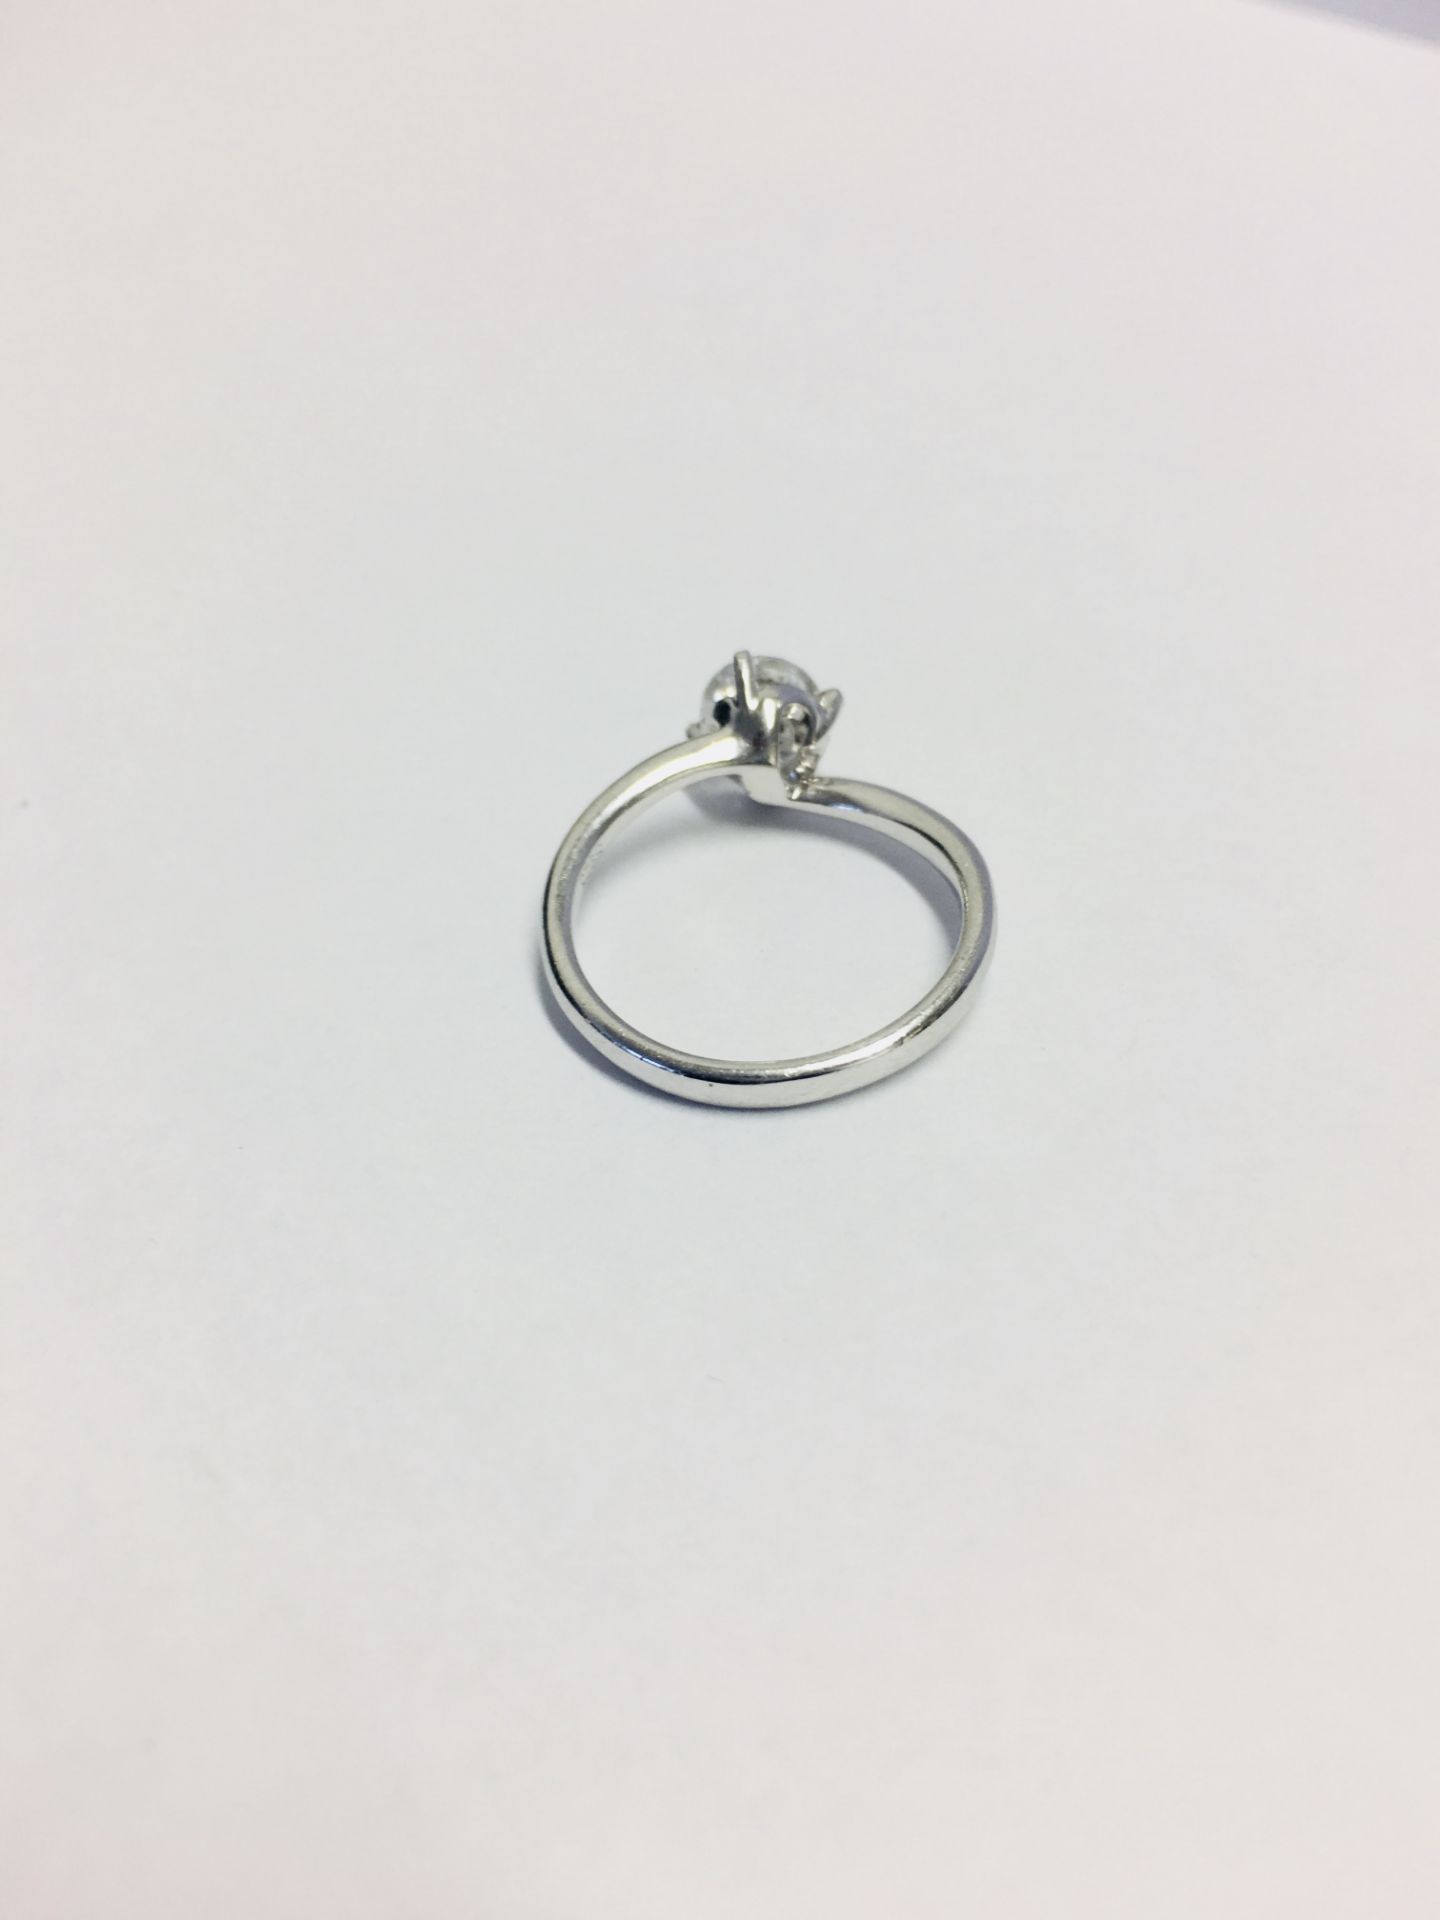 1.00ct Diamond solitaire Ring - Image 3 of 6